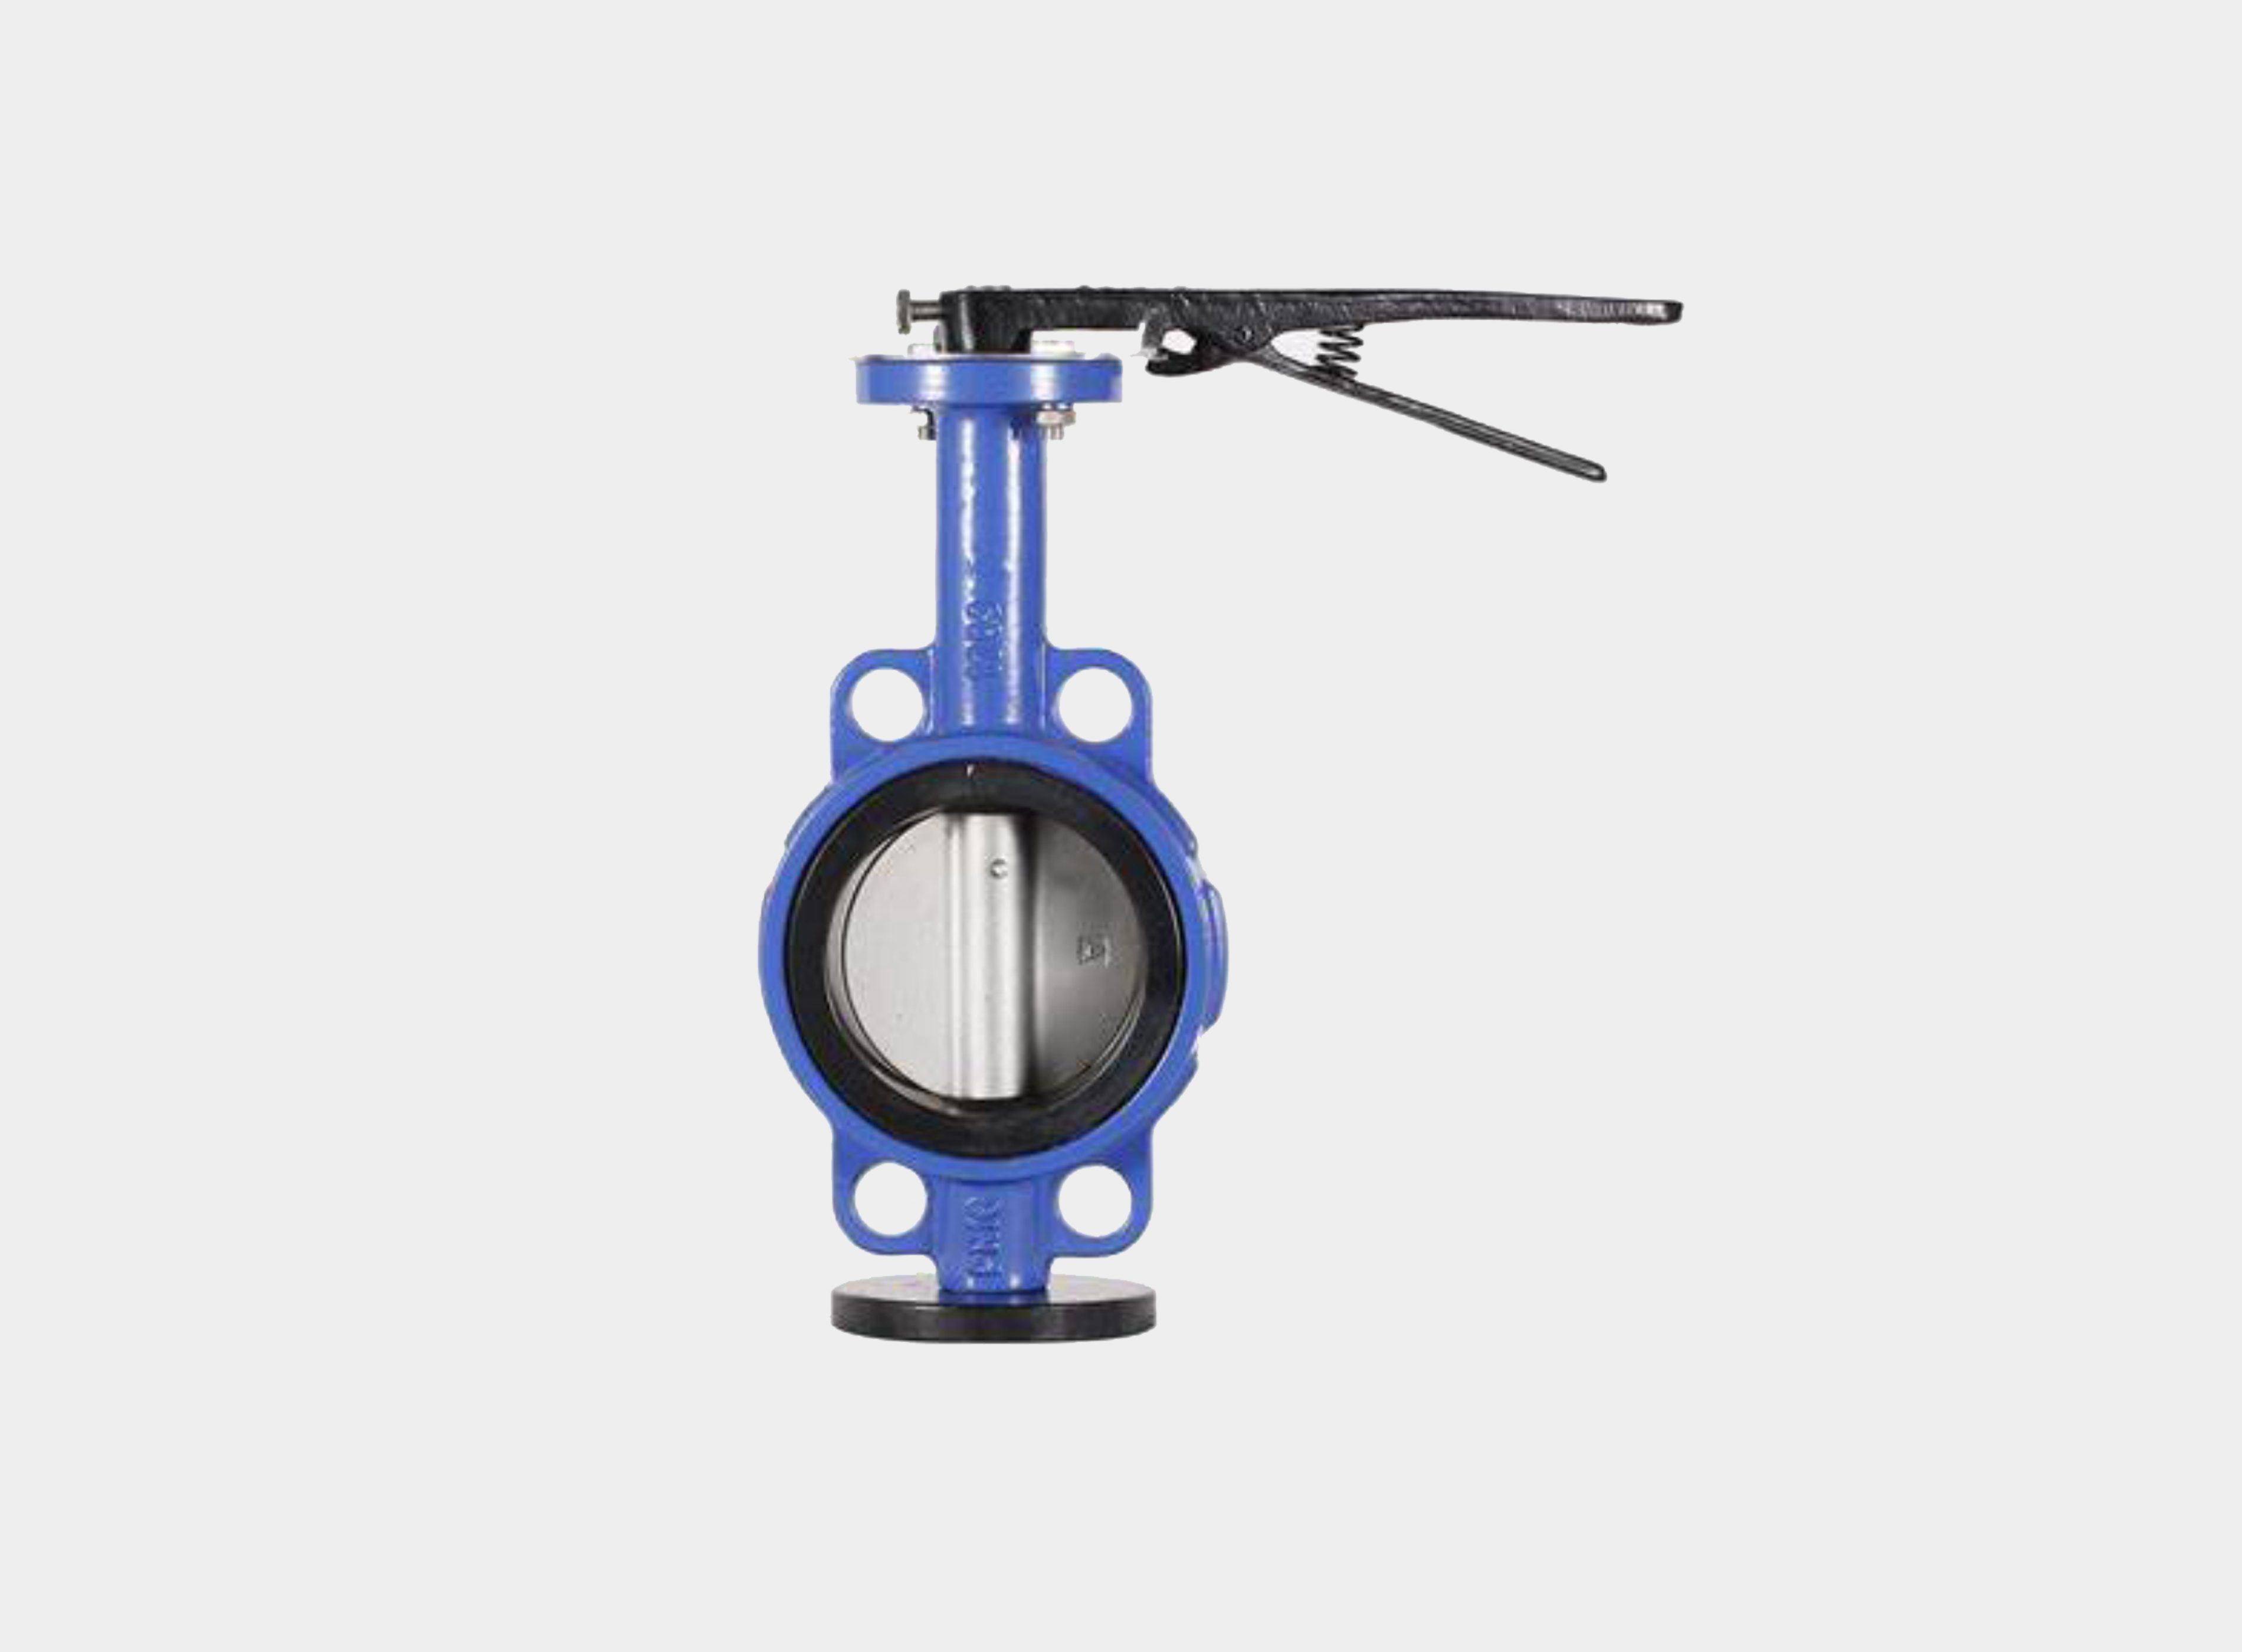 What is the difference between lug butterfly valve and wafer butterfly valve?